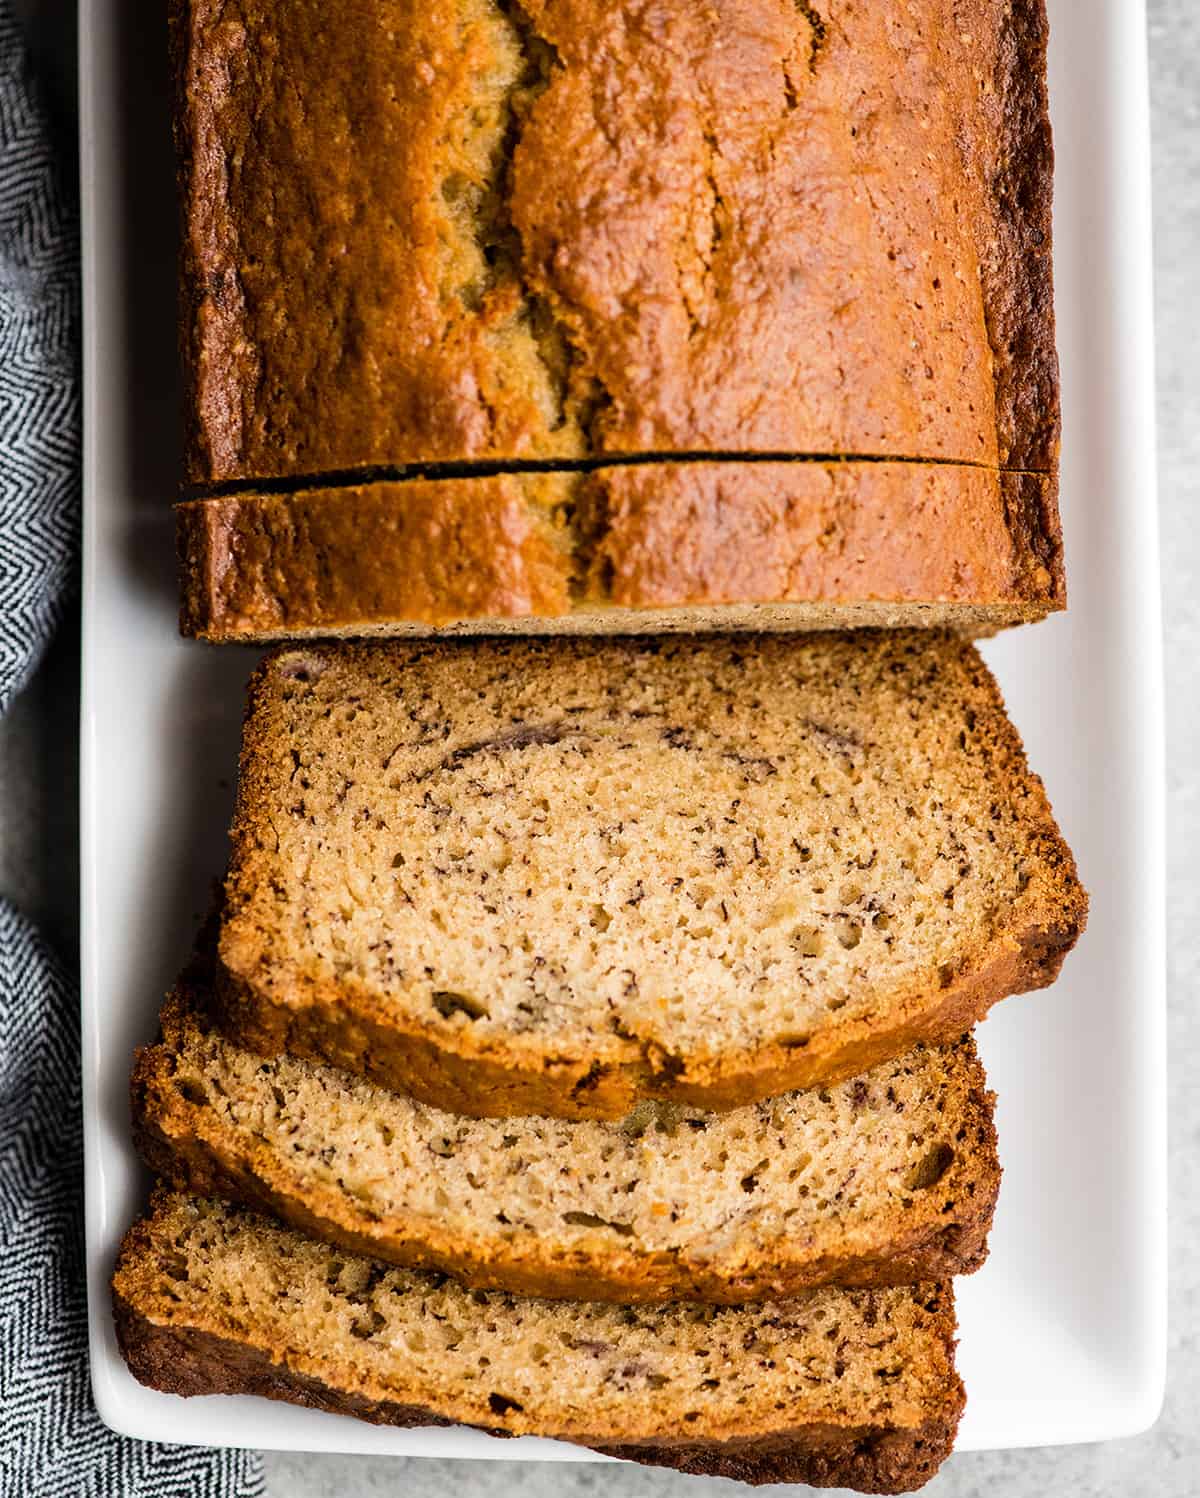 Overhead view of a loaf of banana bread with three slices cut out of it laying flat on a plate